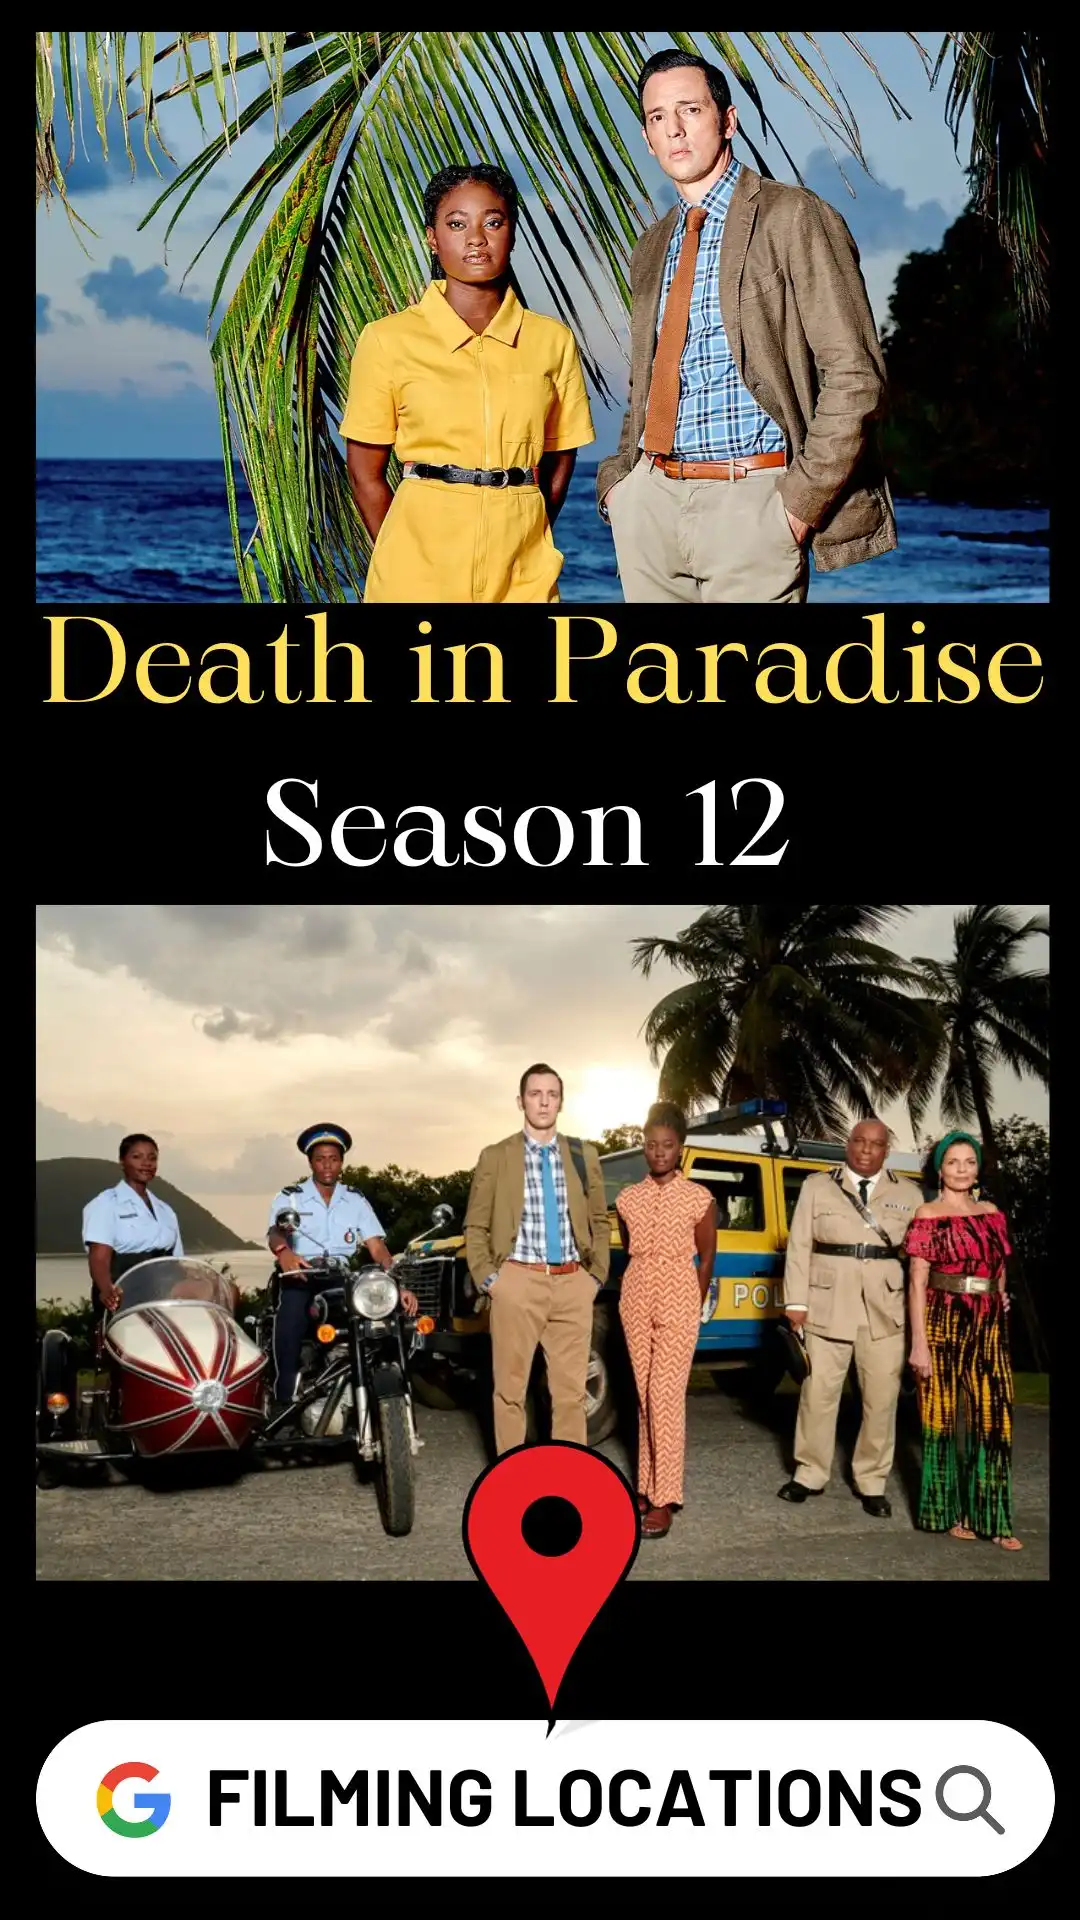 Death in Paradise Season 12 Filming Locations